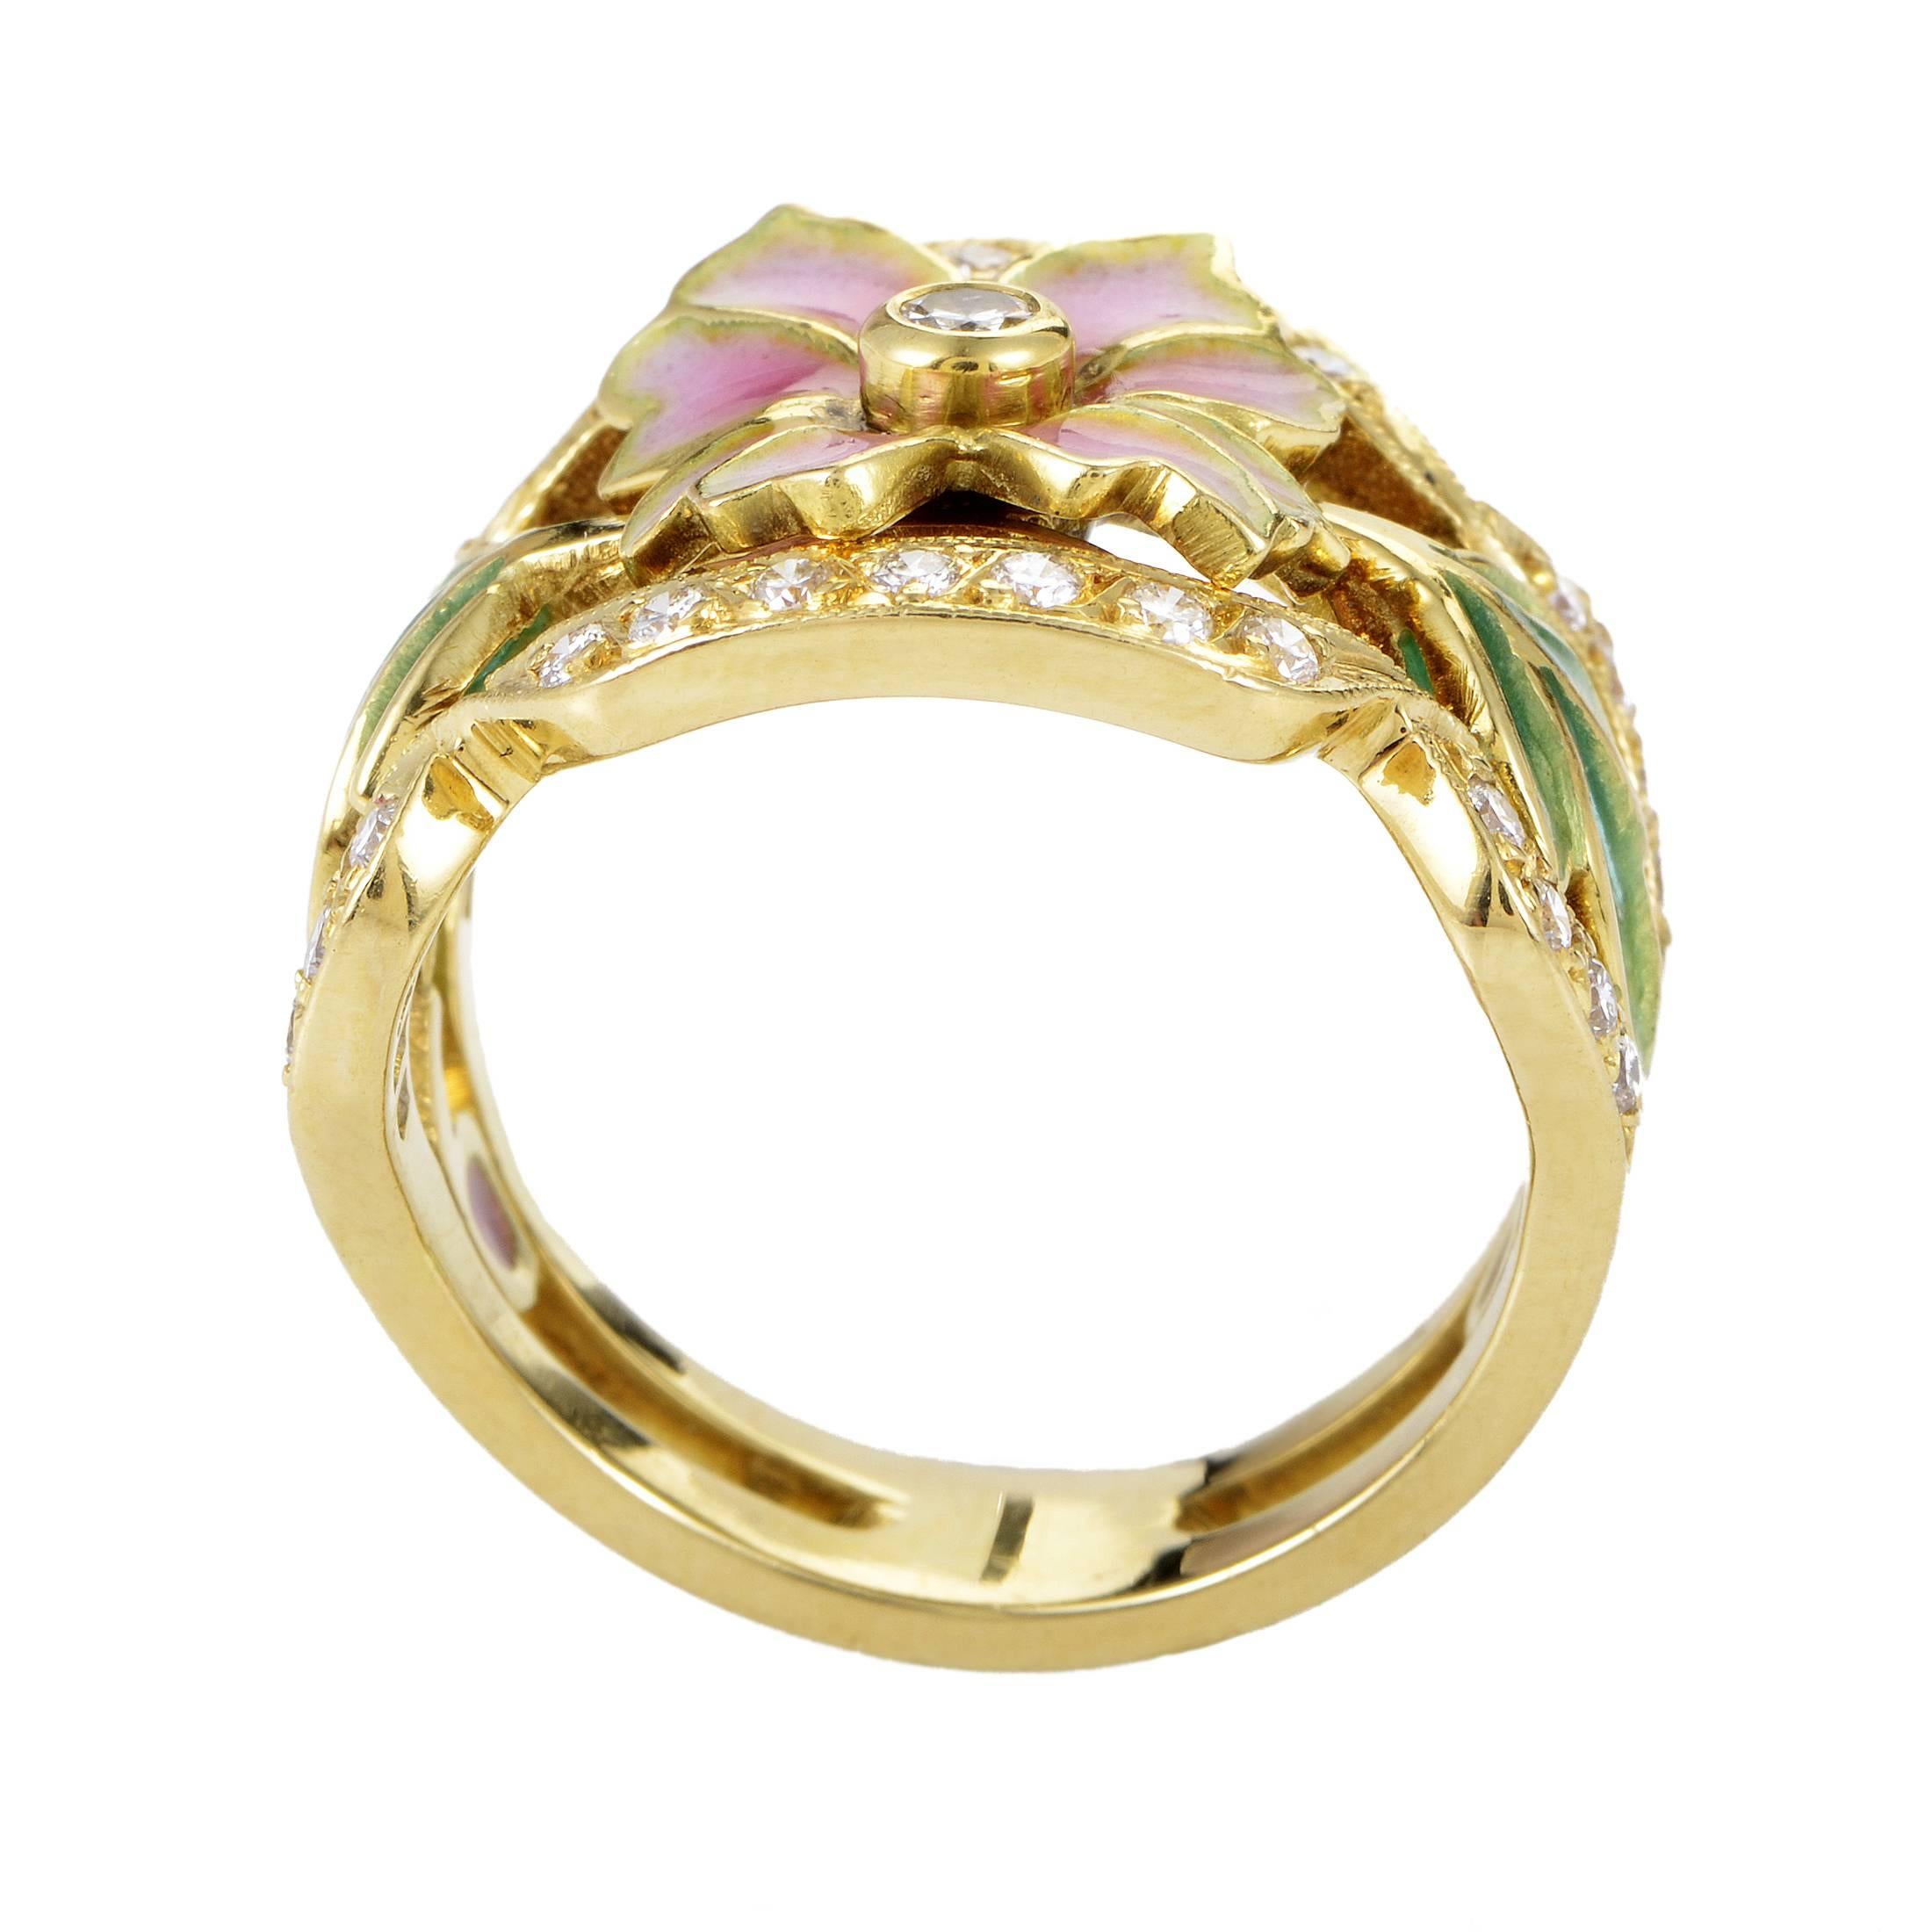 Realistically translating the enchanting beauty of flowers and leaves onto your finger through exceptional use of enamel, this spellbinding ring from Masriera is made of 18K yellow gold and embellished also with 0.65ct of precious diamonds.
Ring